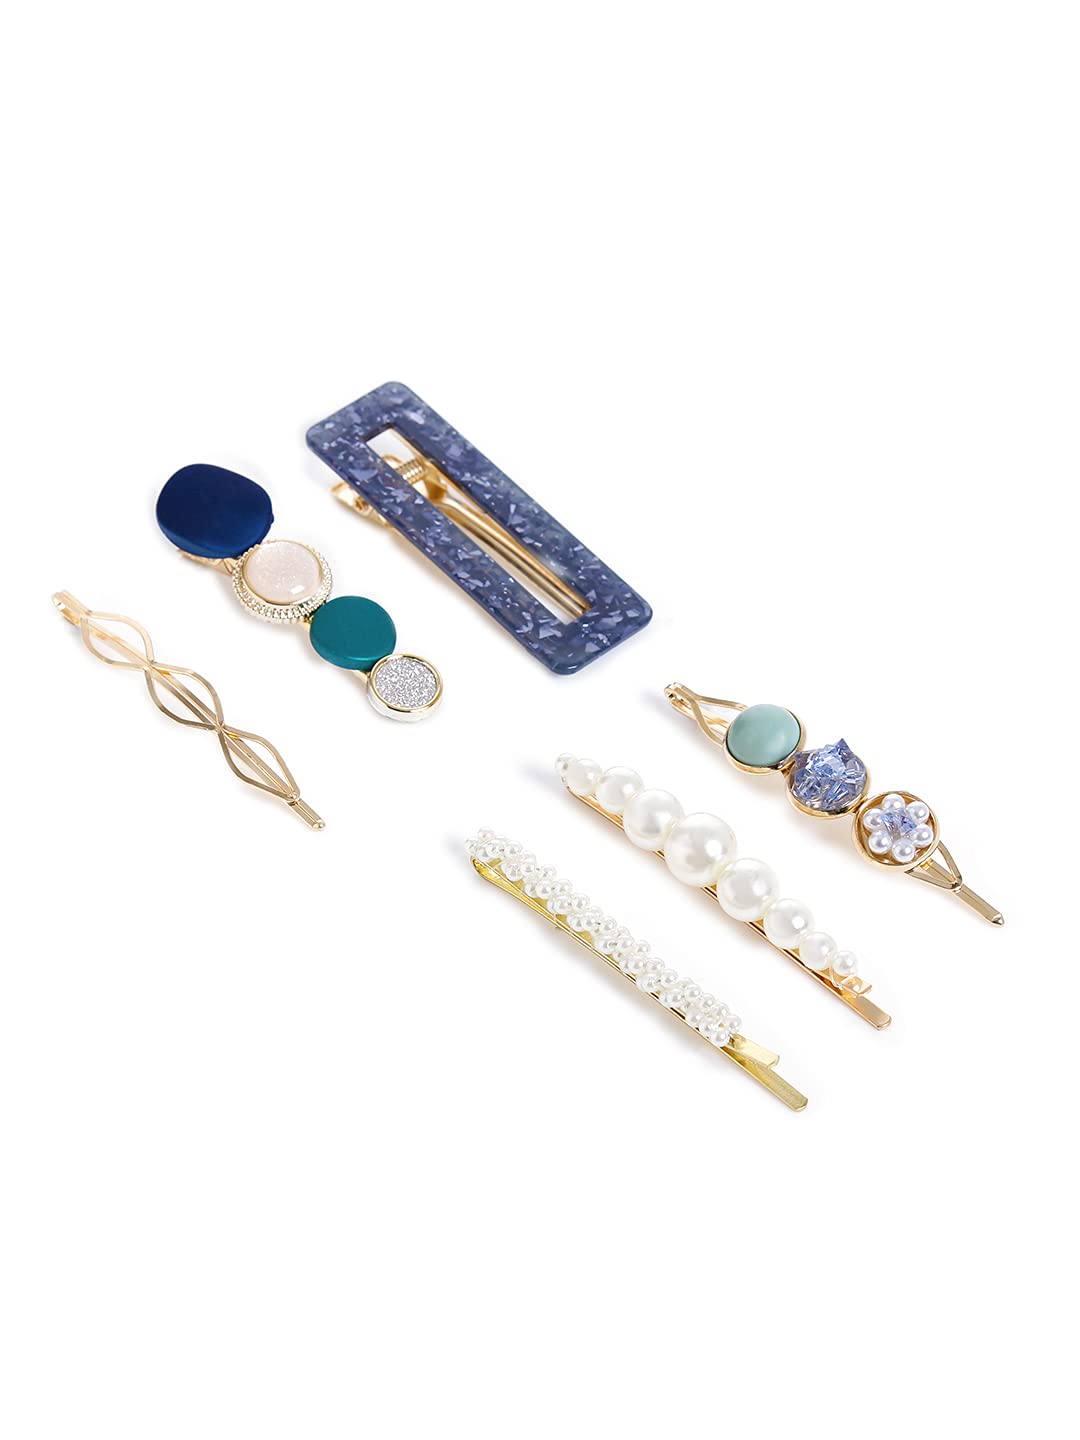 Yellow Chimes Hair Clips for Women 6 Pcs Hairclips for Girls Acrylic Resin Pearl Bobby Pins Fashion Hair Pins Hair Accessories for Women and Girls.